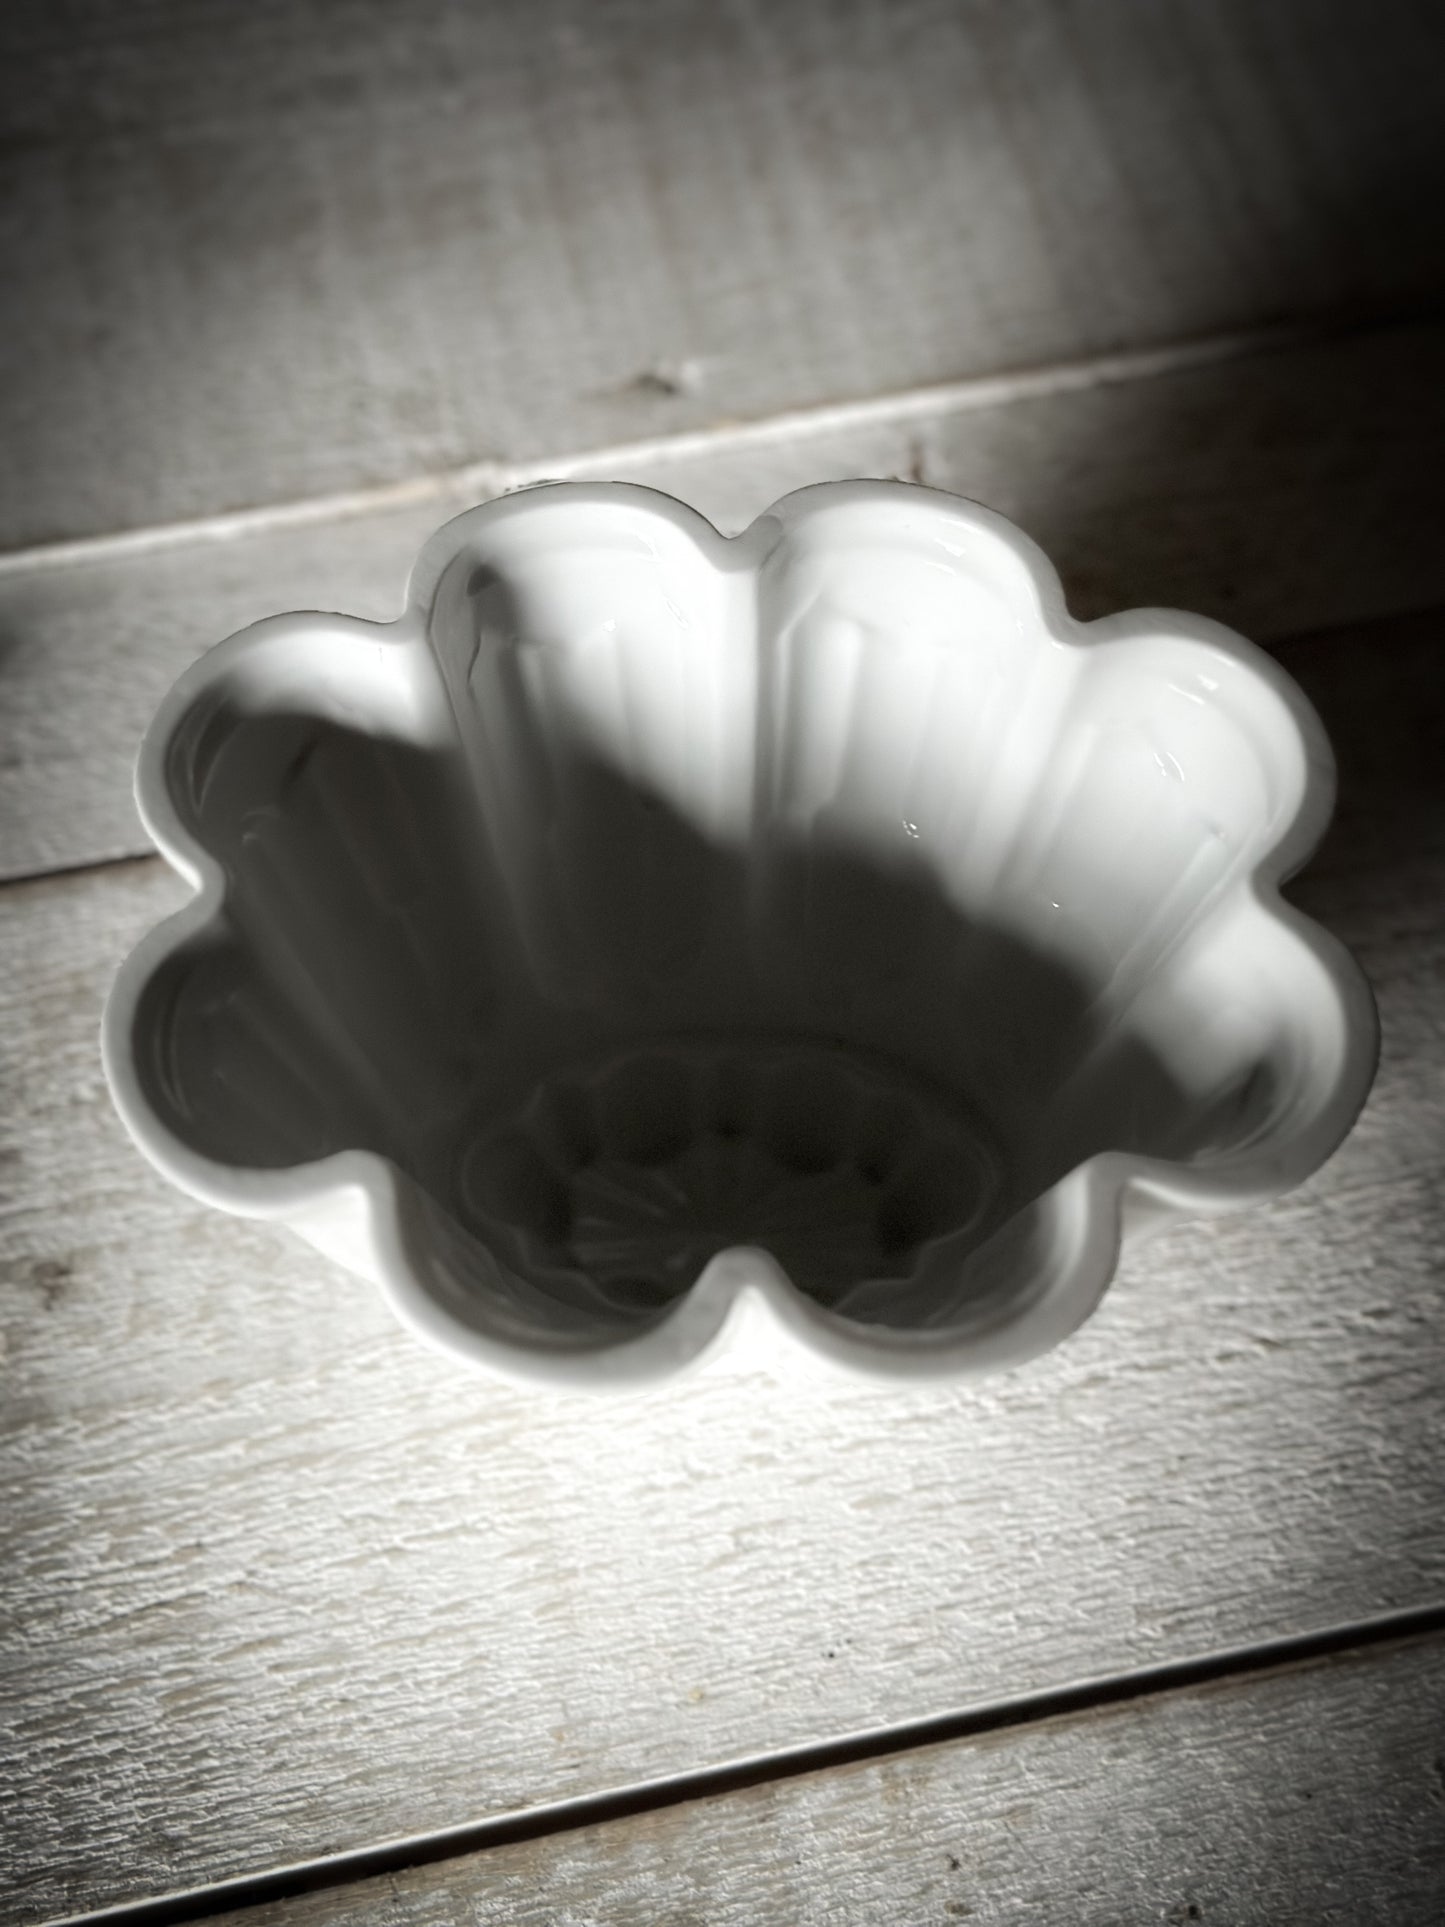 An absolutely gorgeous antique Shelley ironstone jelly, blancmange mould